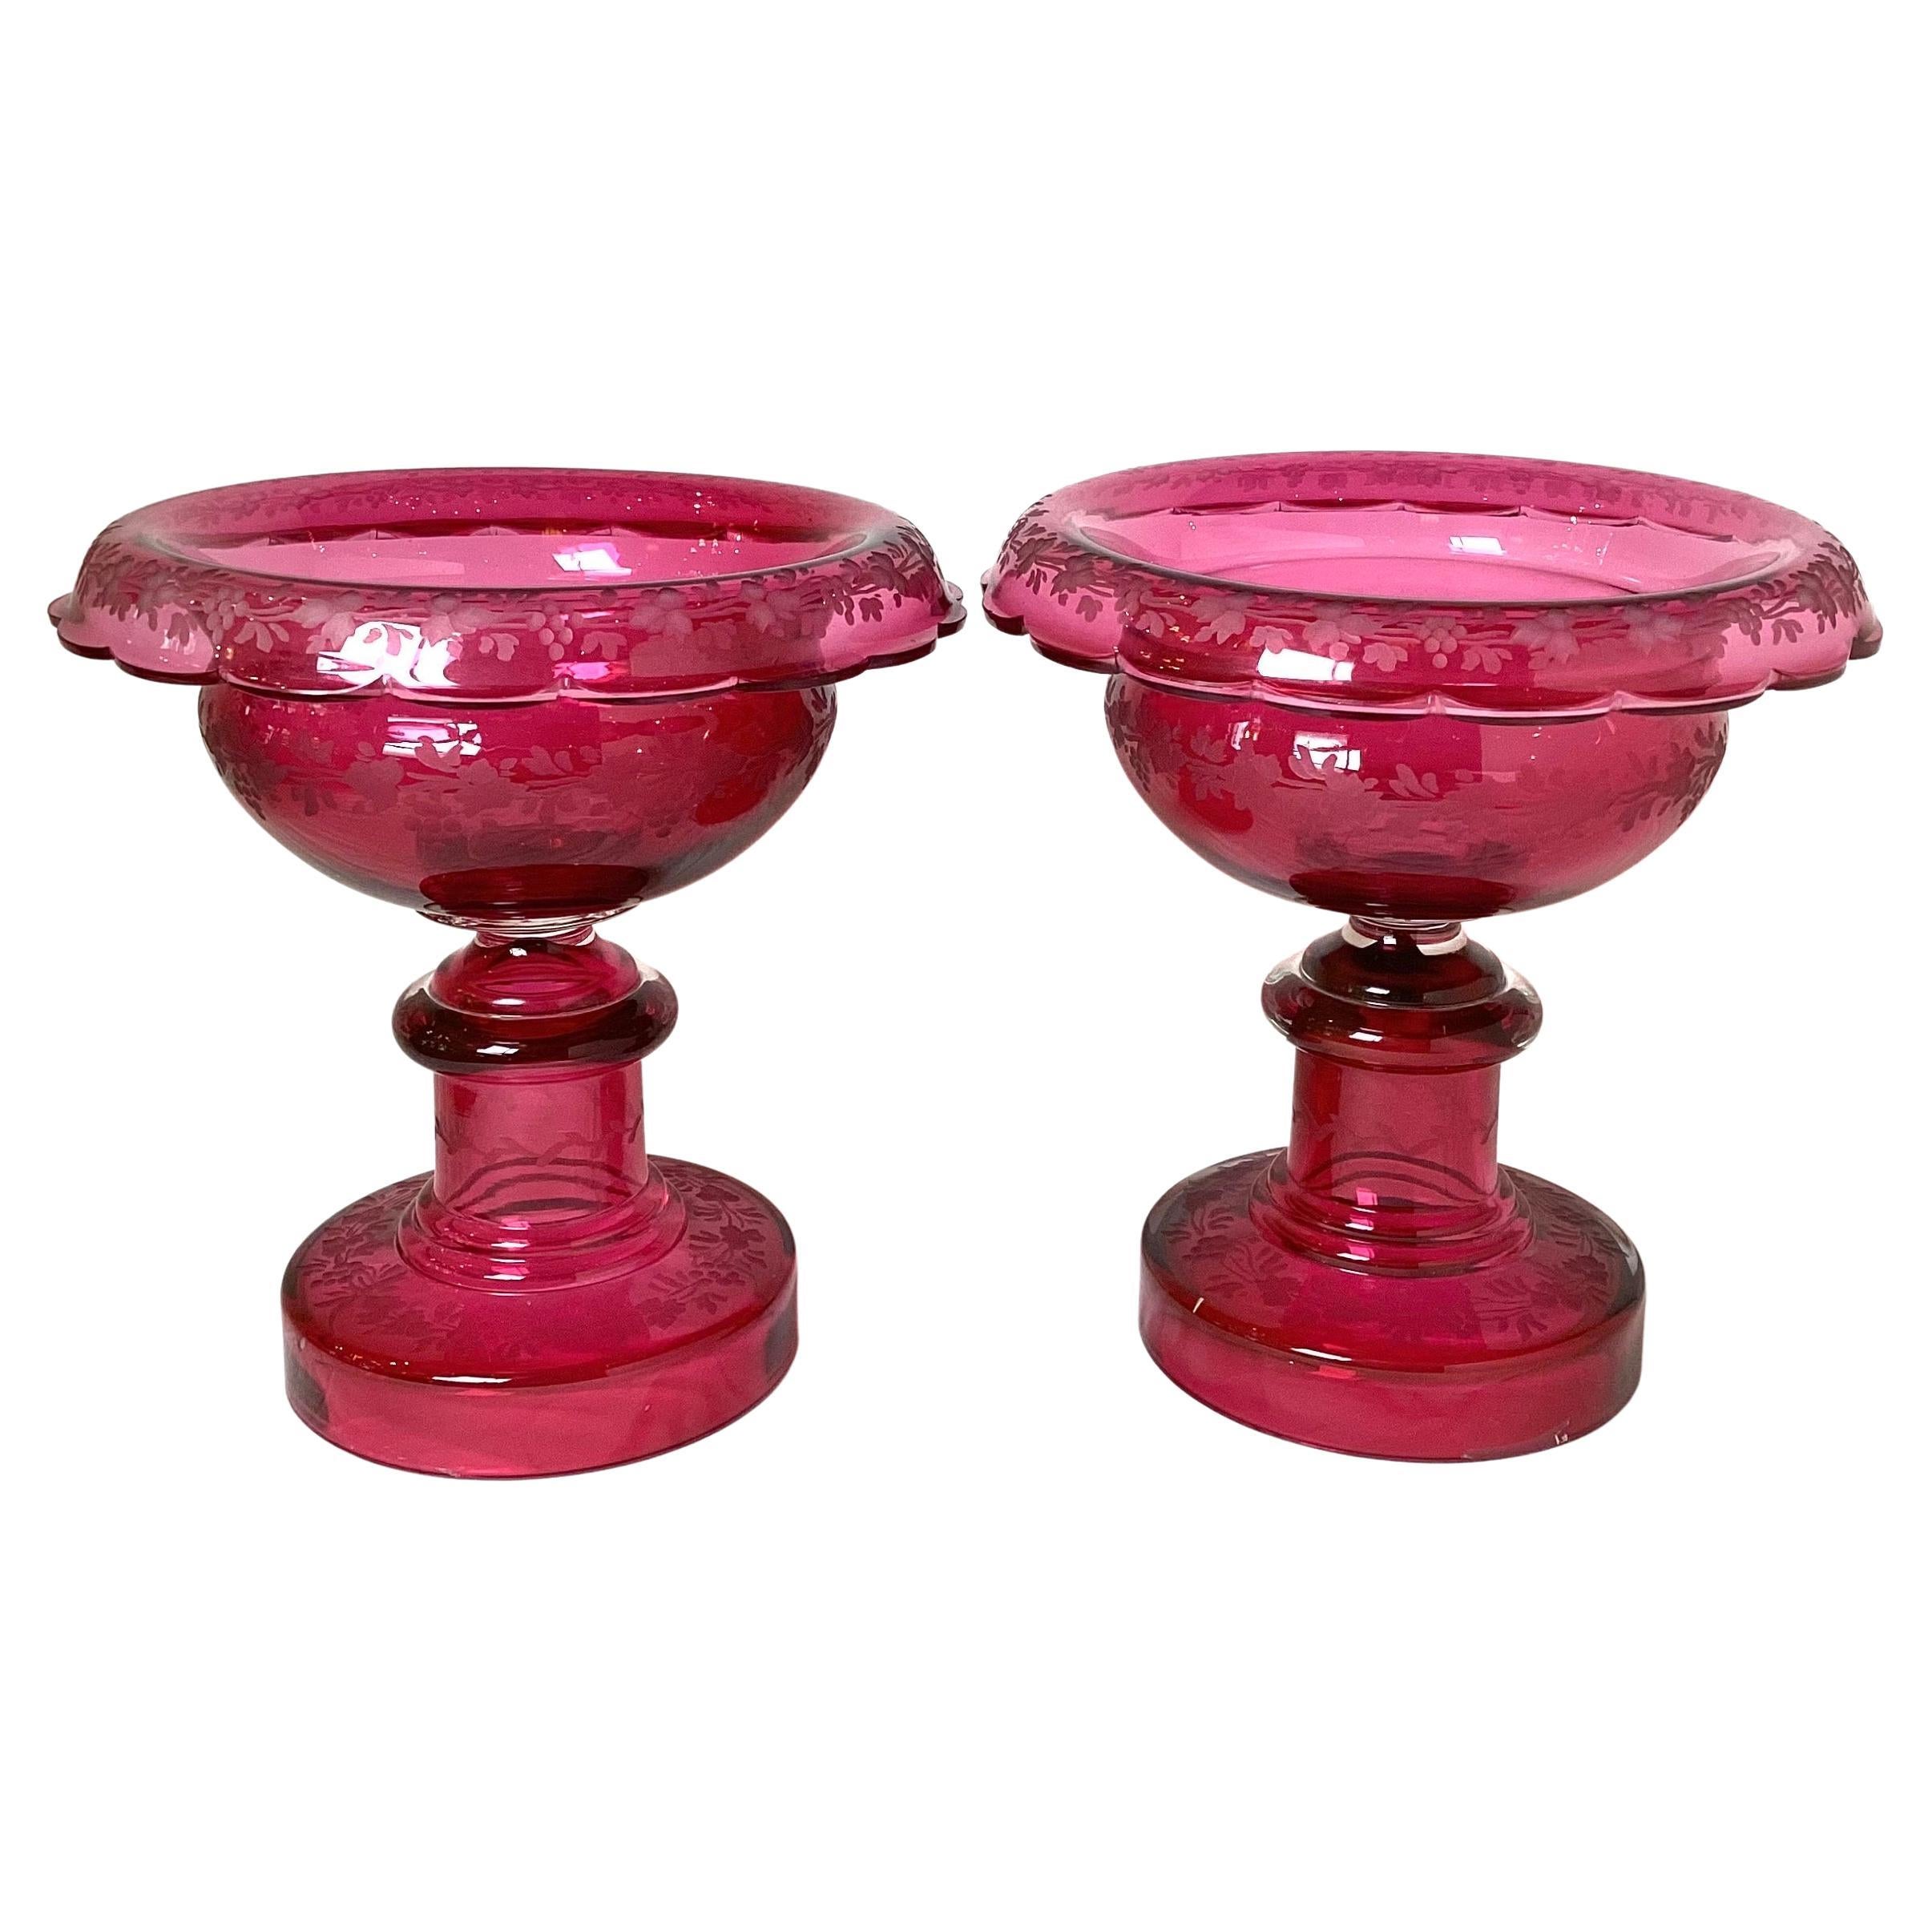 Pair of 19th Century Victorian Cranberry Glass Pedestal Bowl Compotes For Sale